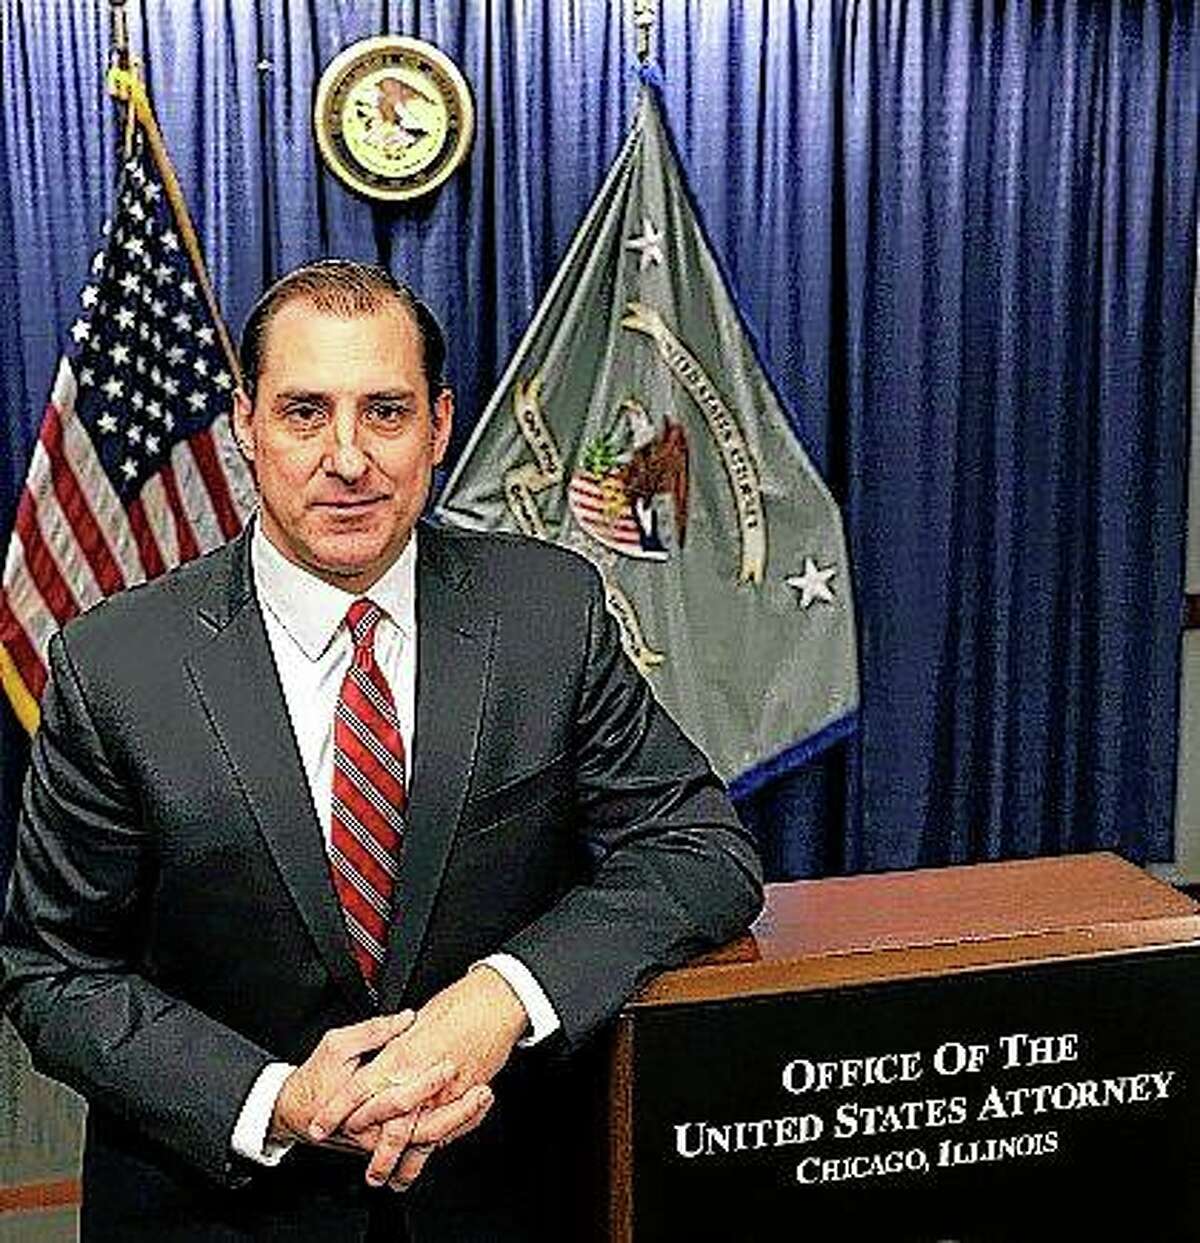 John R. Lausch Jr., the new U.S. attorney for the Northern District of Illinois, says President Donald Trump never tried to speak to him before the president nominated him for the position. He said he has still not spoken to the president and has not been given any instructions by Attorney General Jeff Sessions to change the priorities of the office. Charles Rex Arbogast | AP